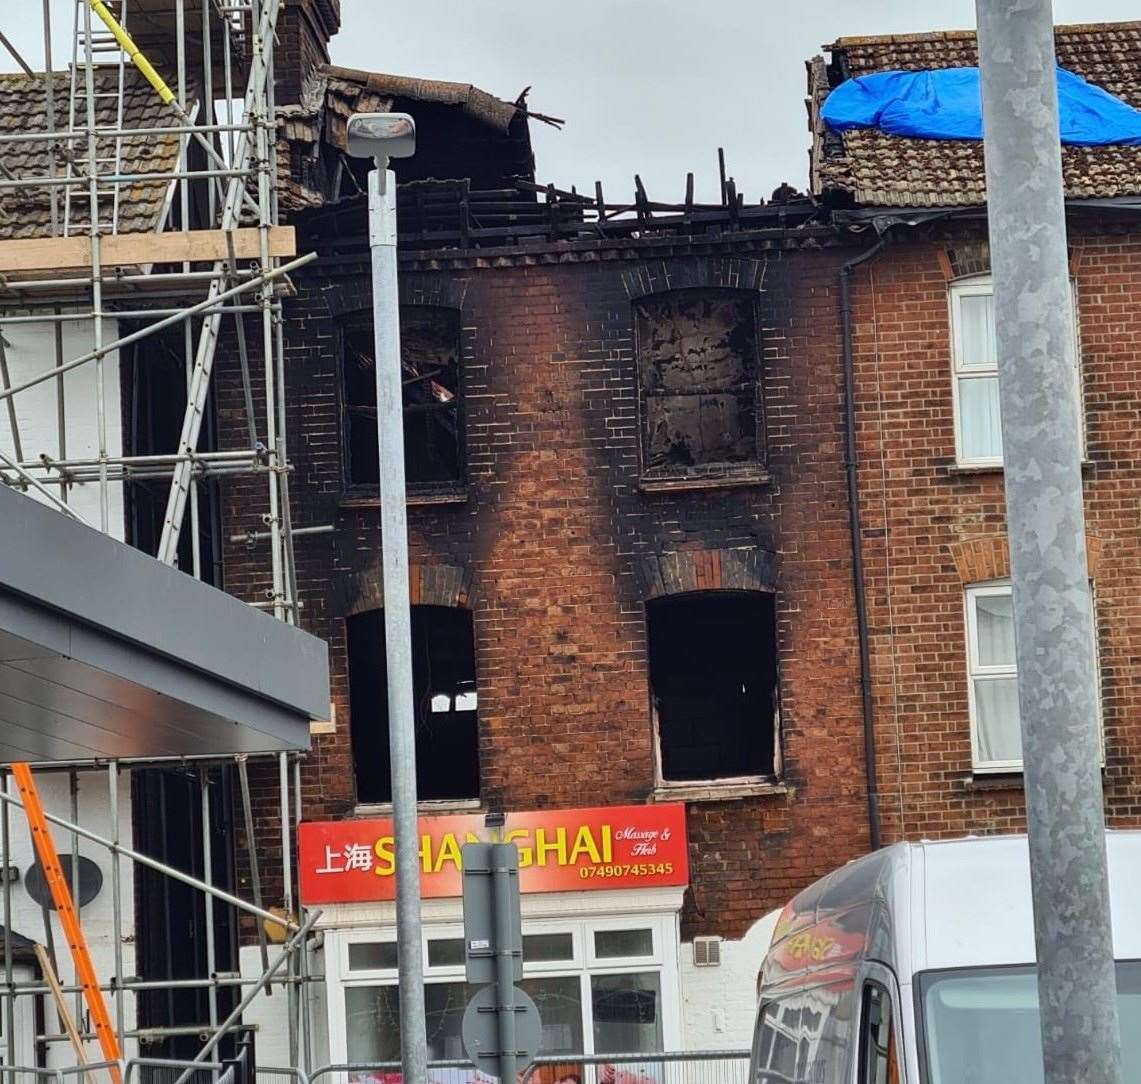 The aftermath of the fire at Barden Road, Tonbridge Picture: James Phillips